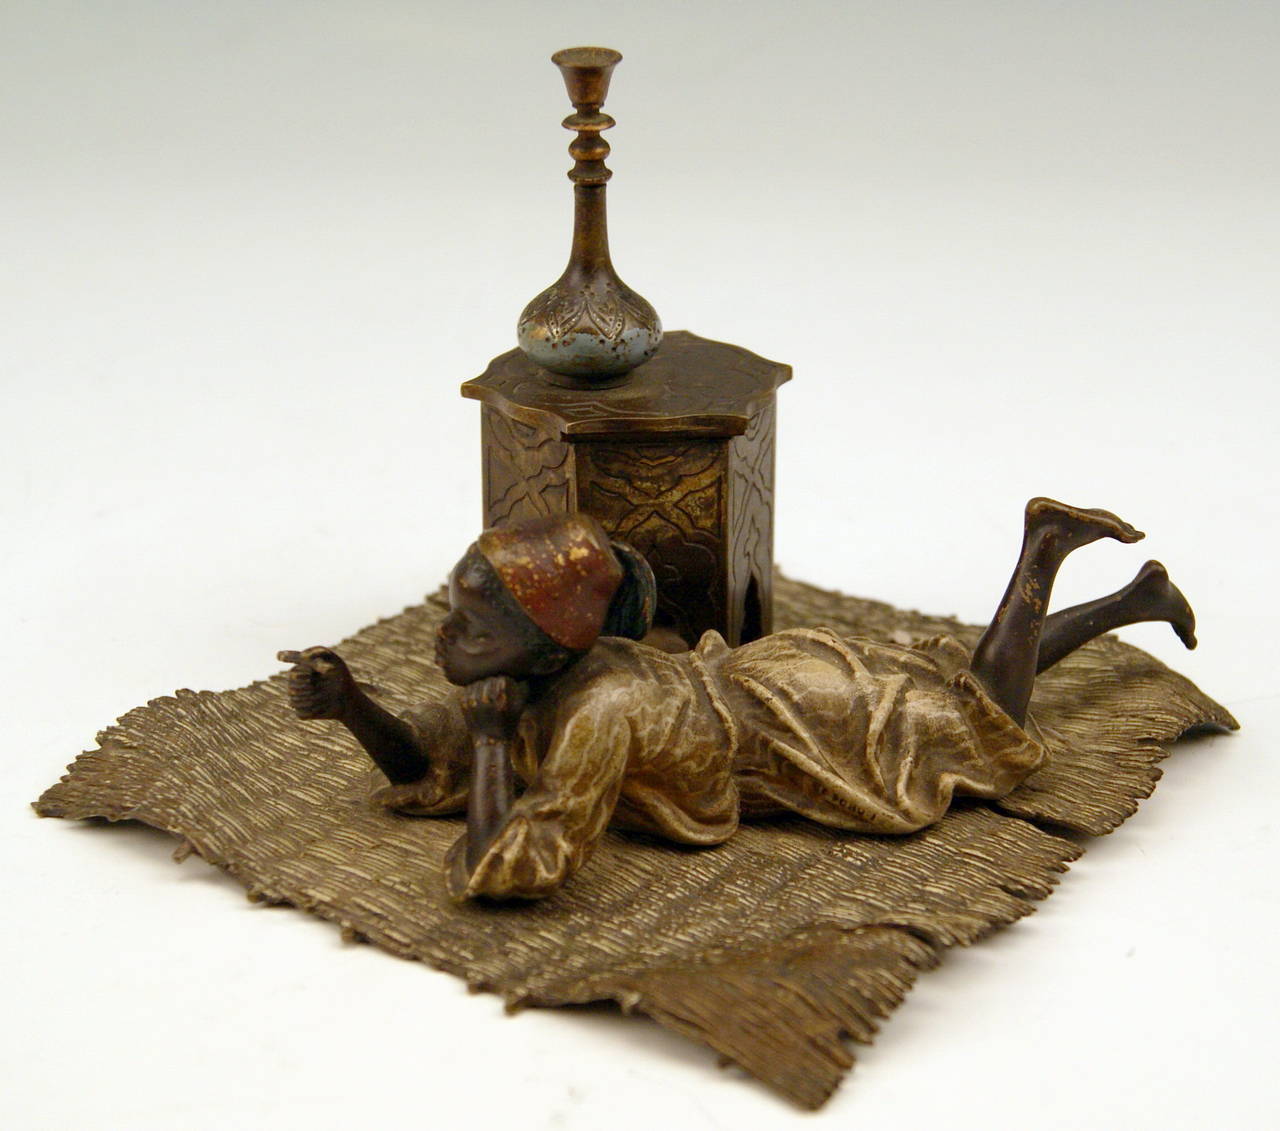 Gorgeous Vienna Bronze figurine made by famous manufactory Ber(g)man(n)  circa  1900. 
 The Arab boy - lying prone on a wattled carpet  -  wears the characteristic fez / tarboosh  as well as Arab garments. He smokes a cigarette, having the legs